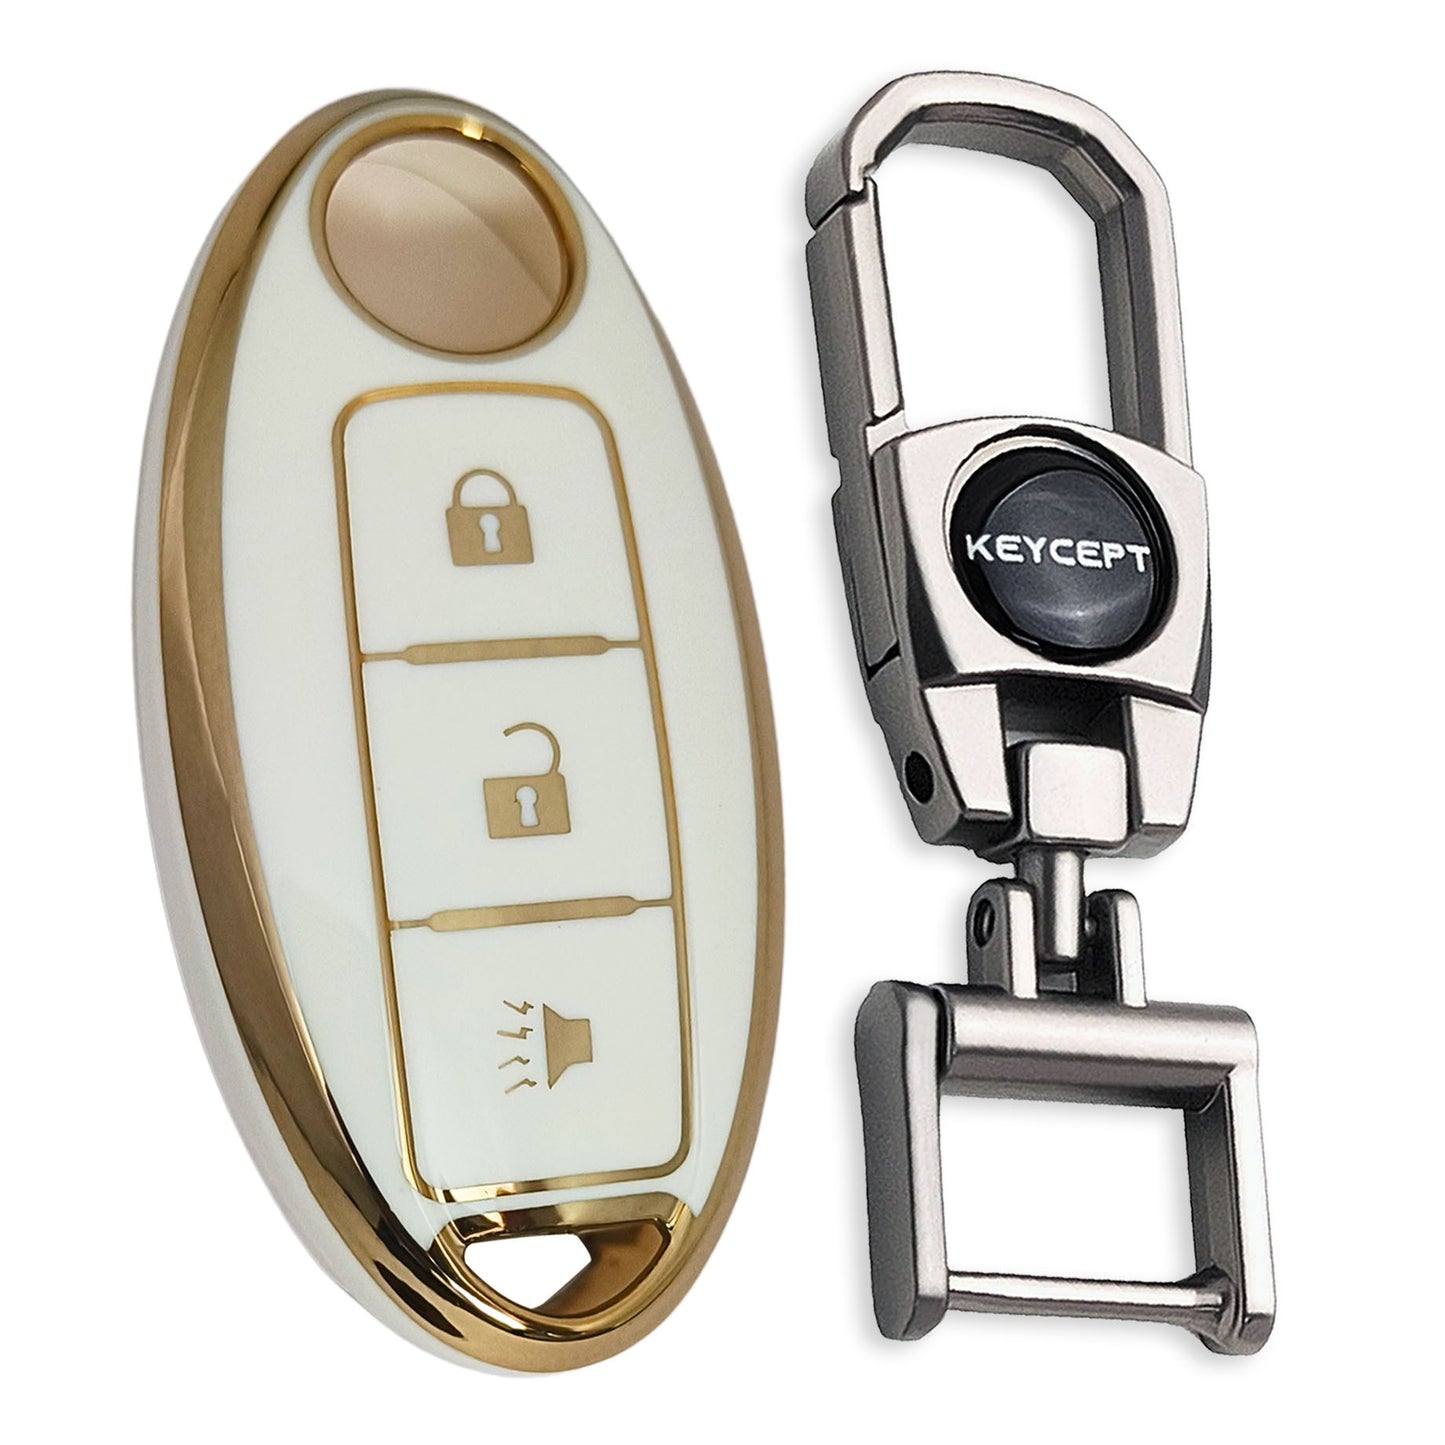 TPU Key Cover for Micra | Sunny | Teana | Magnite 3 button Smart Key with Keychain 2